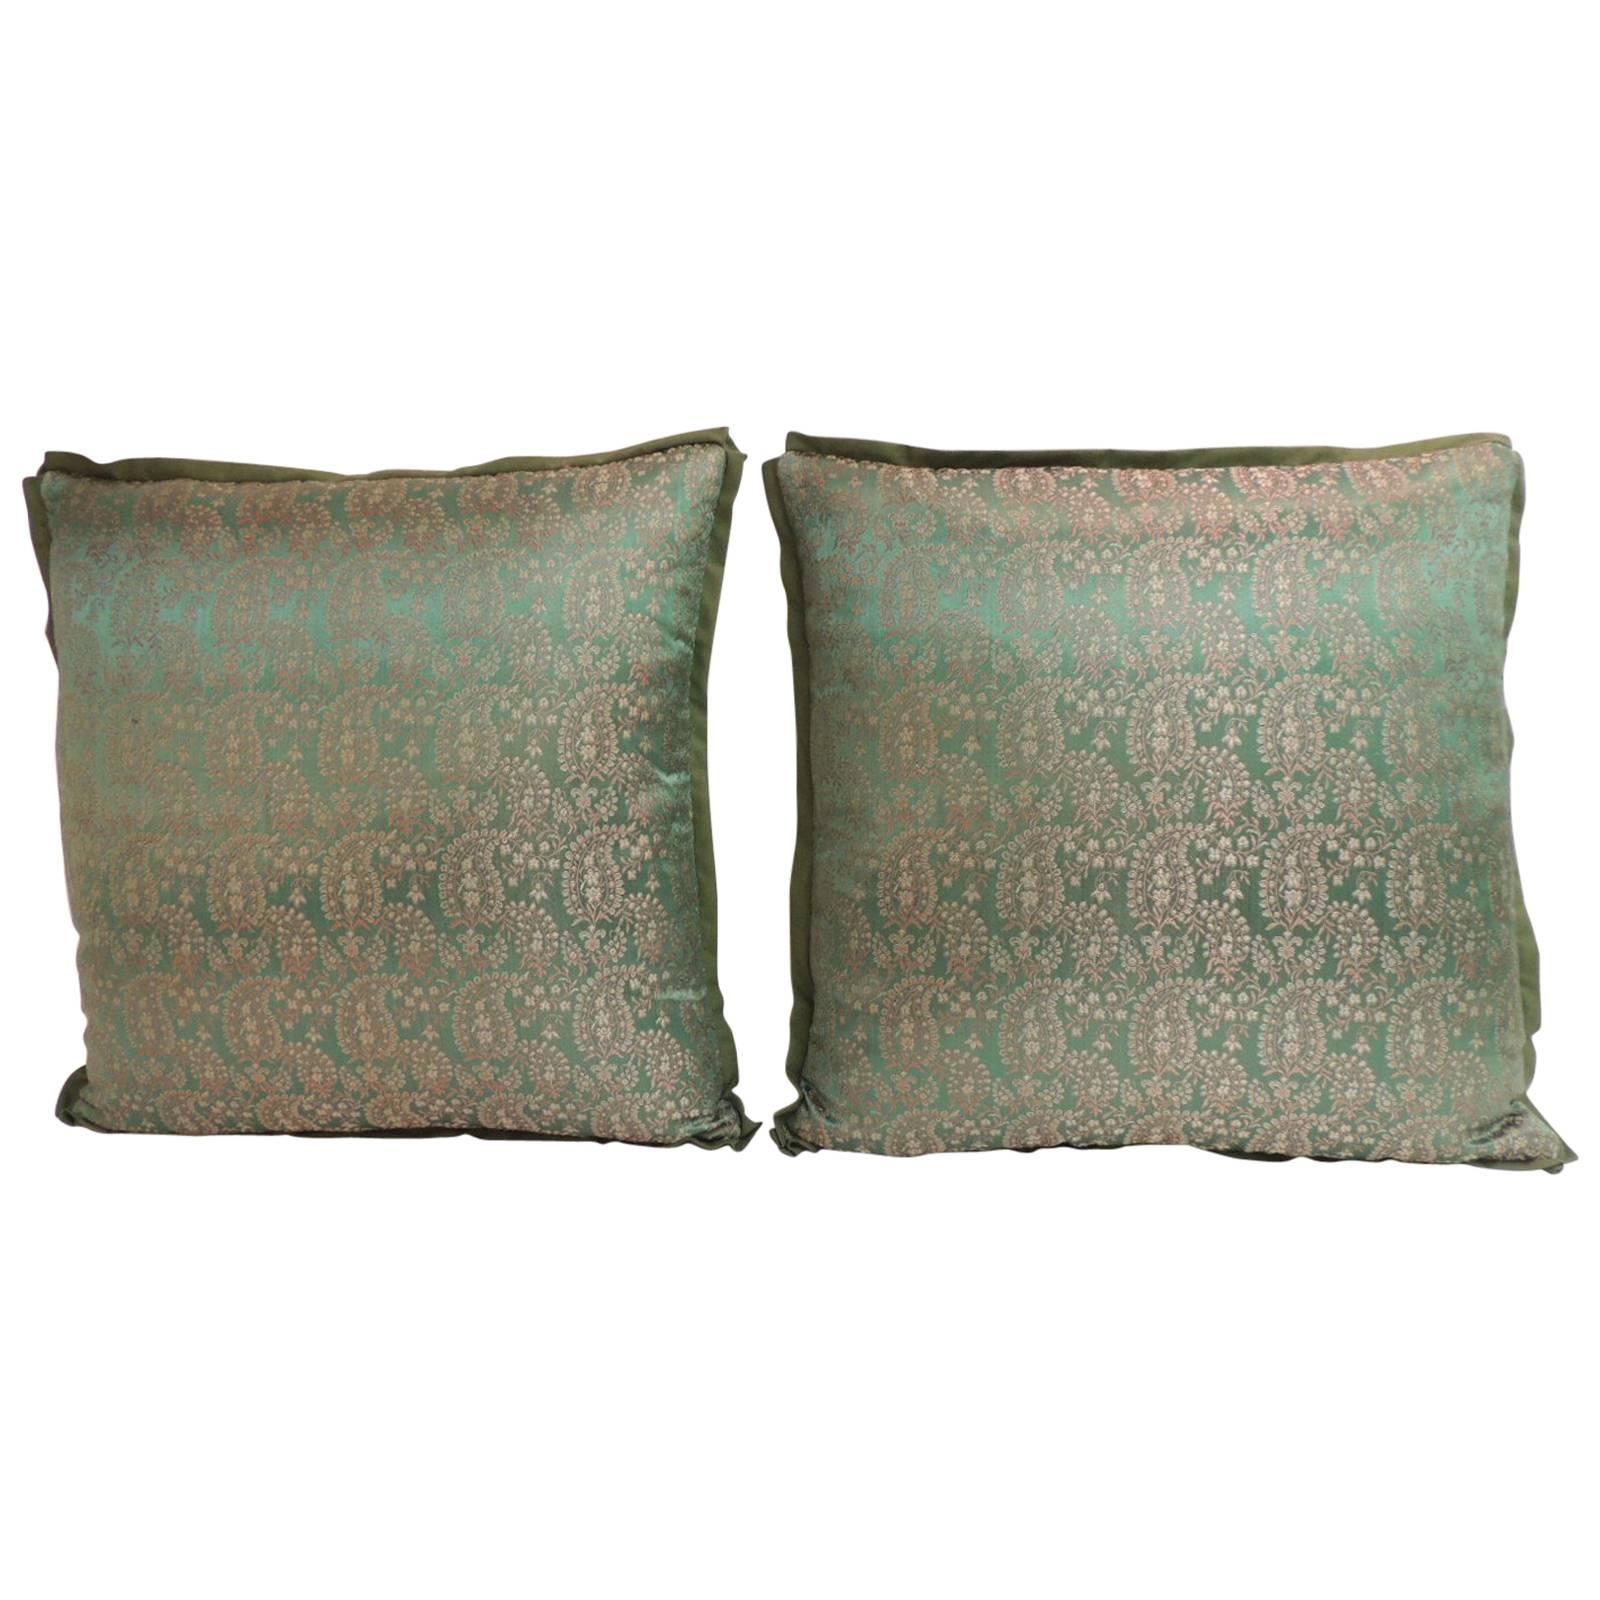 Pair of Green and Gold Embroidered Silk Indian Saree Decorative Pillows